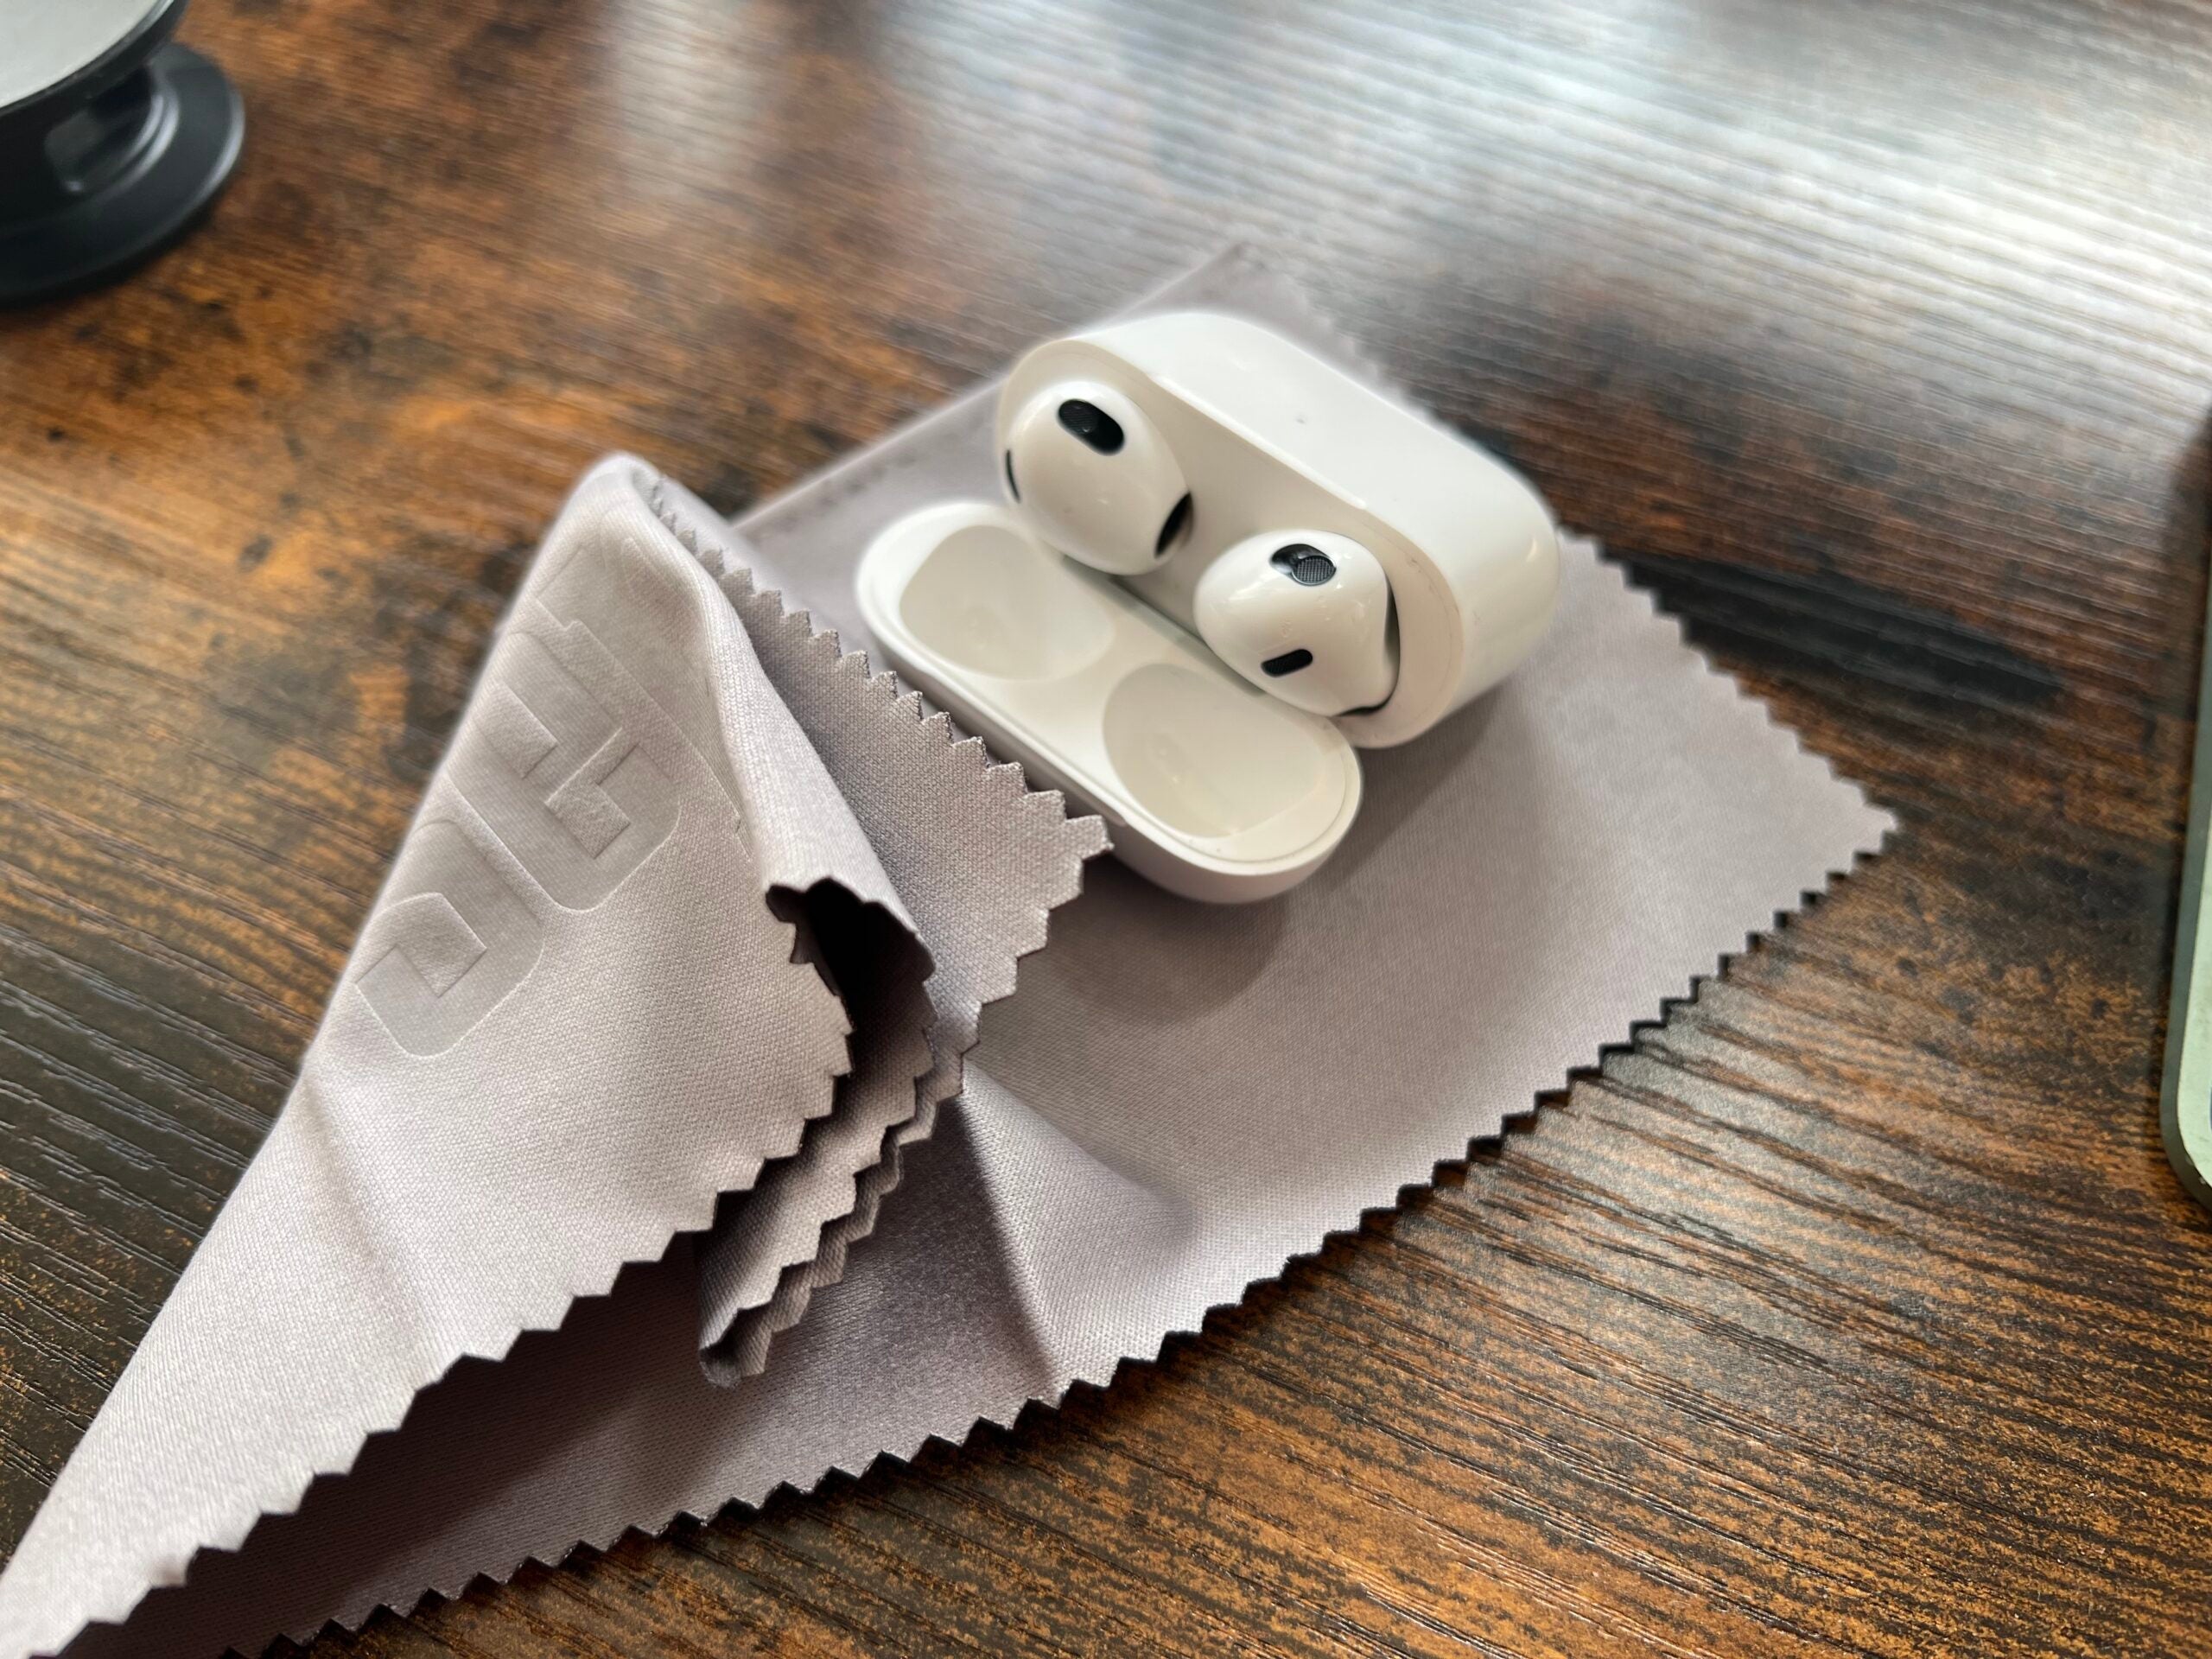 Use a soft, dry, lint-free cloth to clean your AirPods
Avoid using water or cleaning products